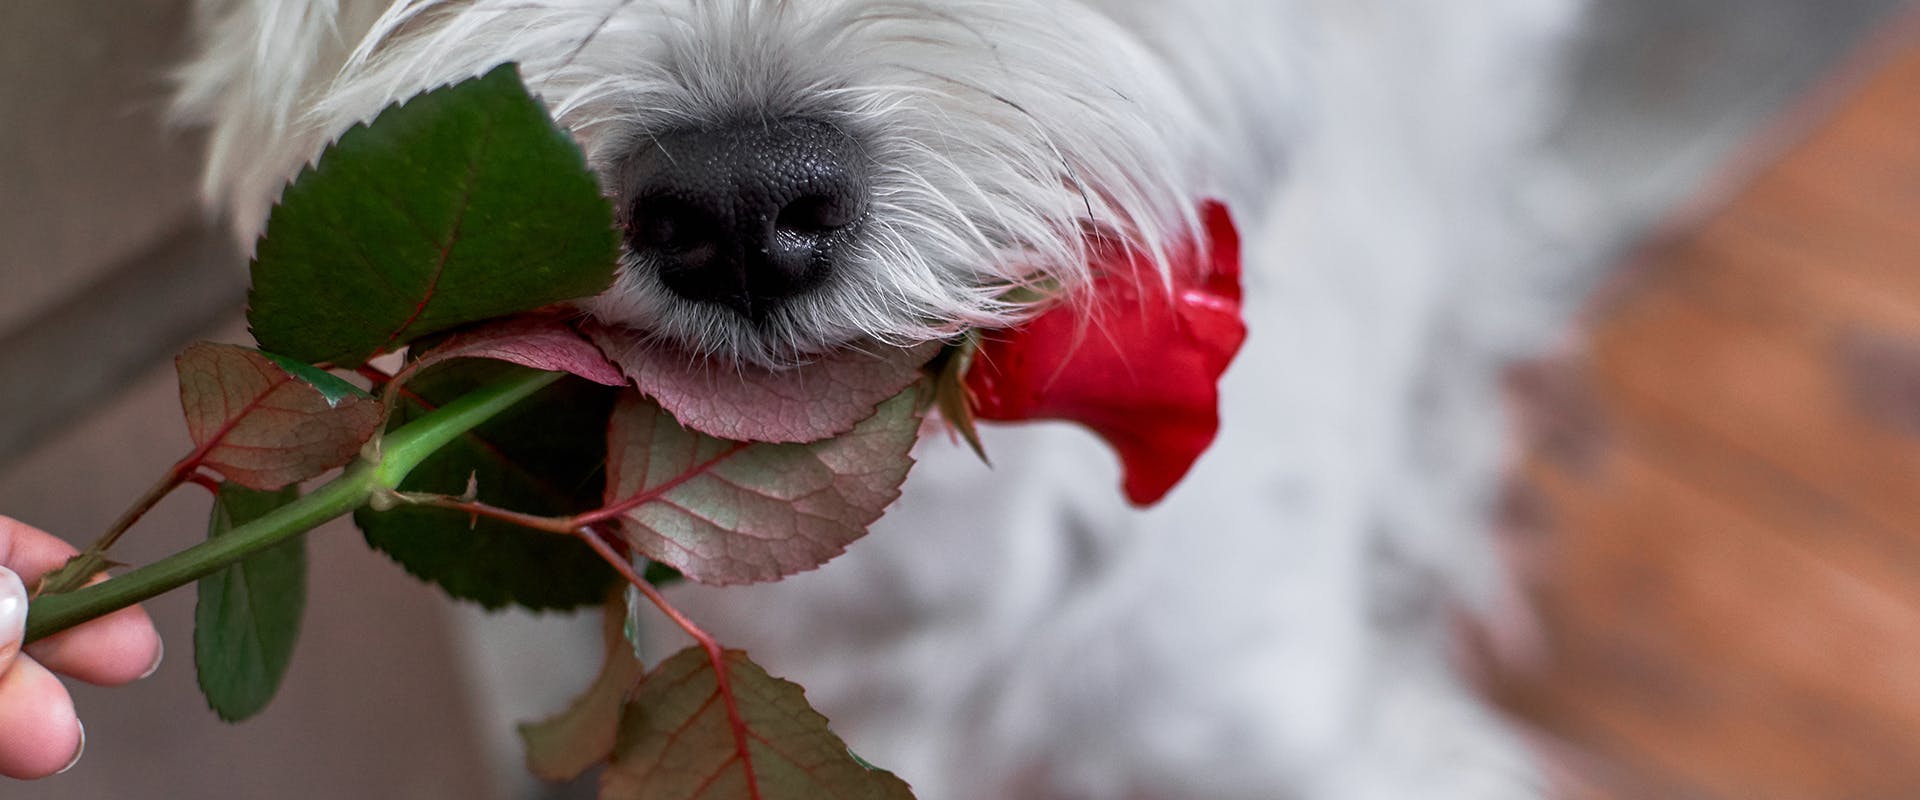 A close up of a dog's mouth holding a single red rose